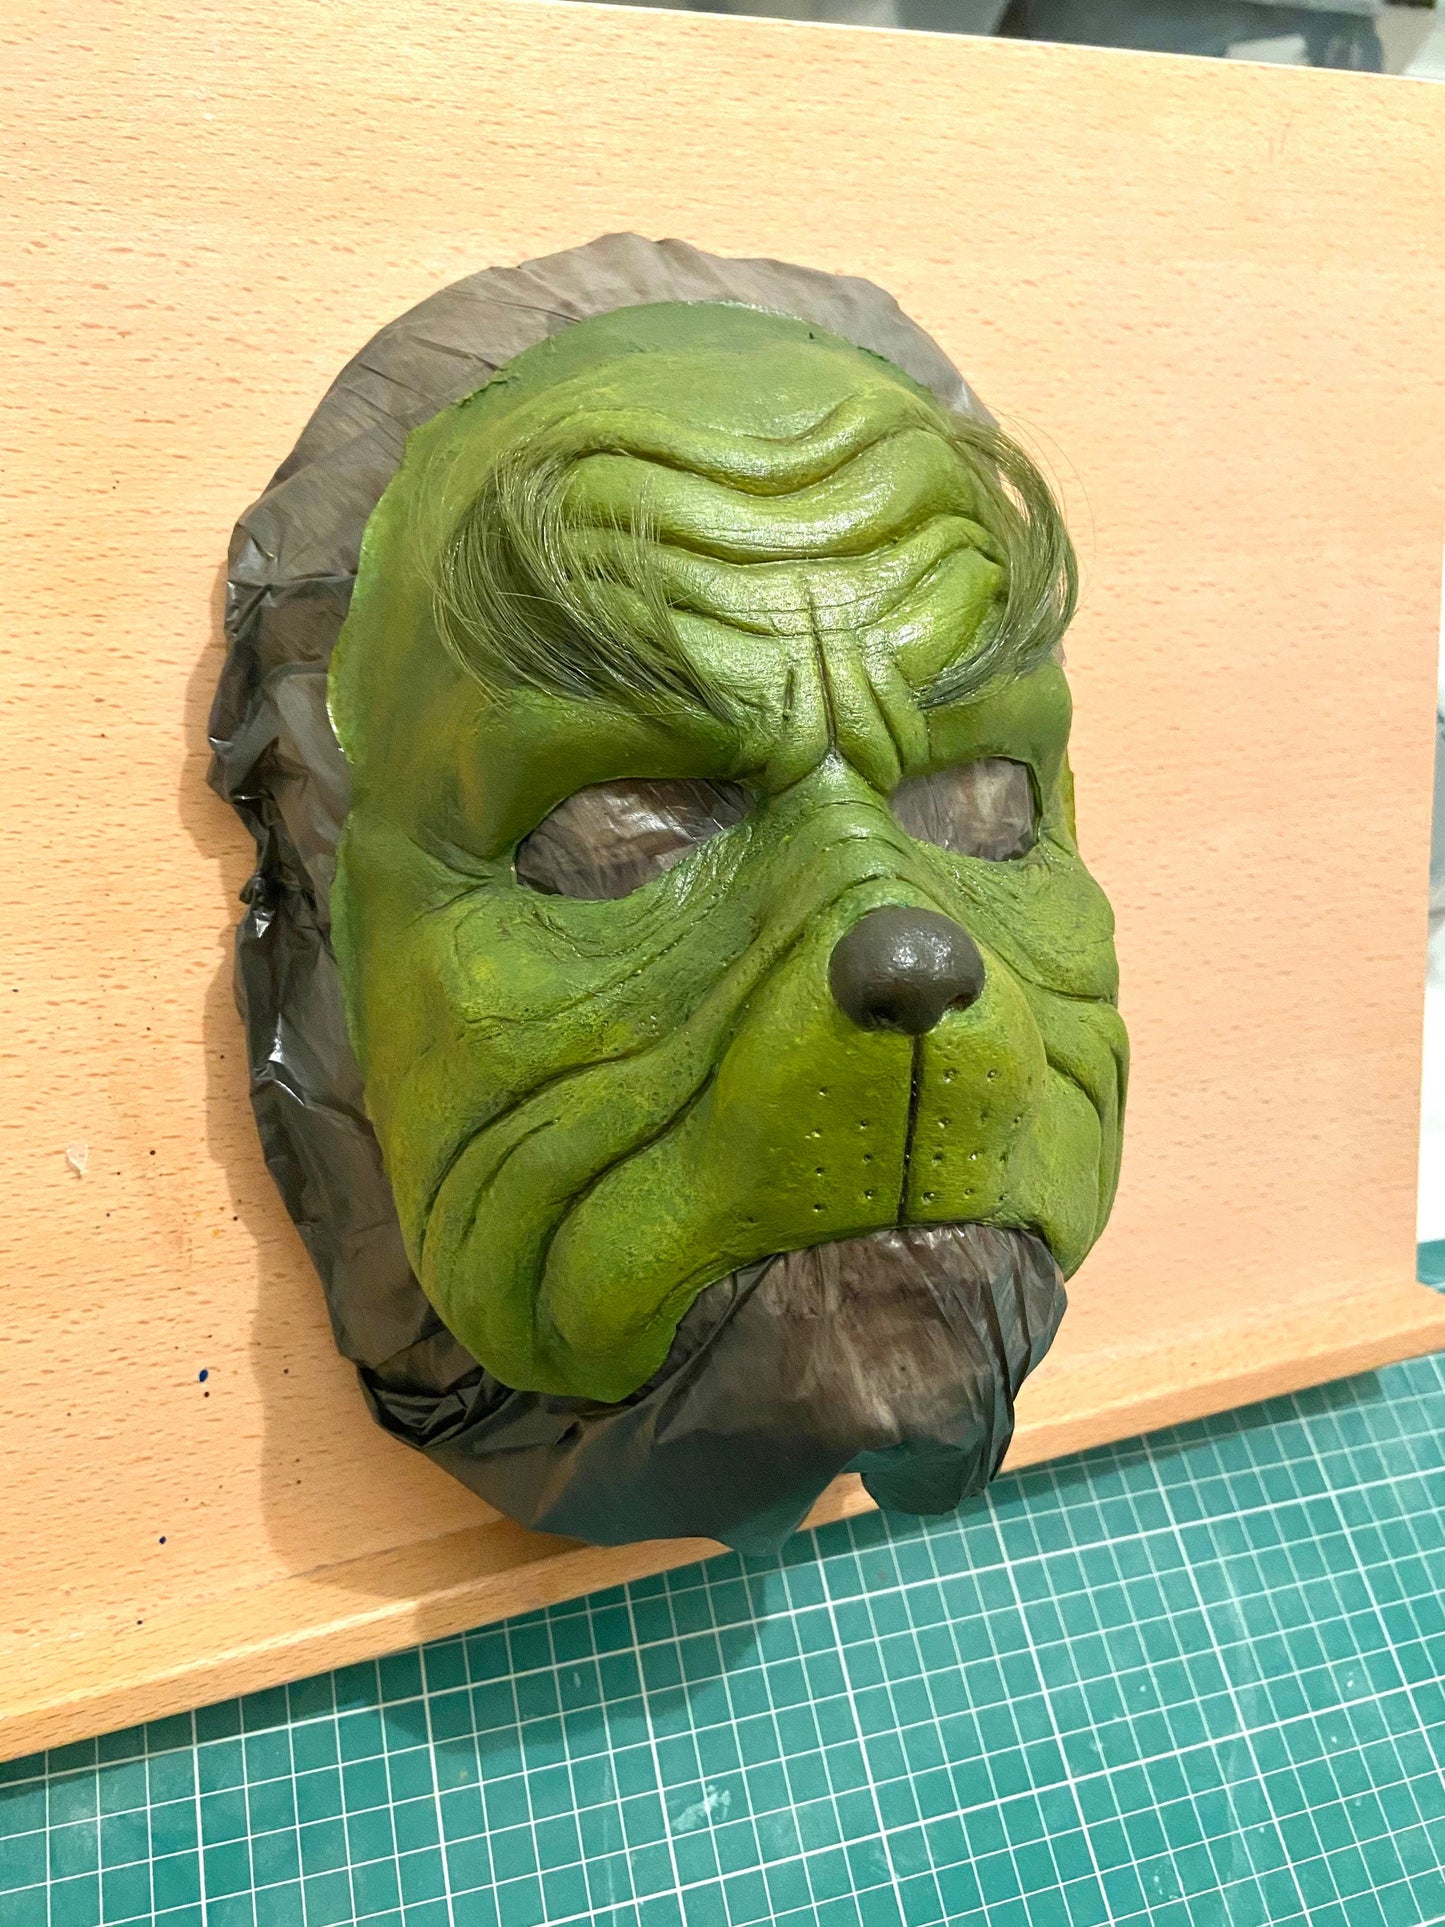 The mean green monster latex prosthetic painted